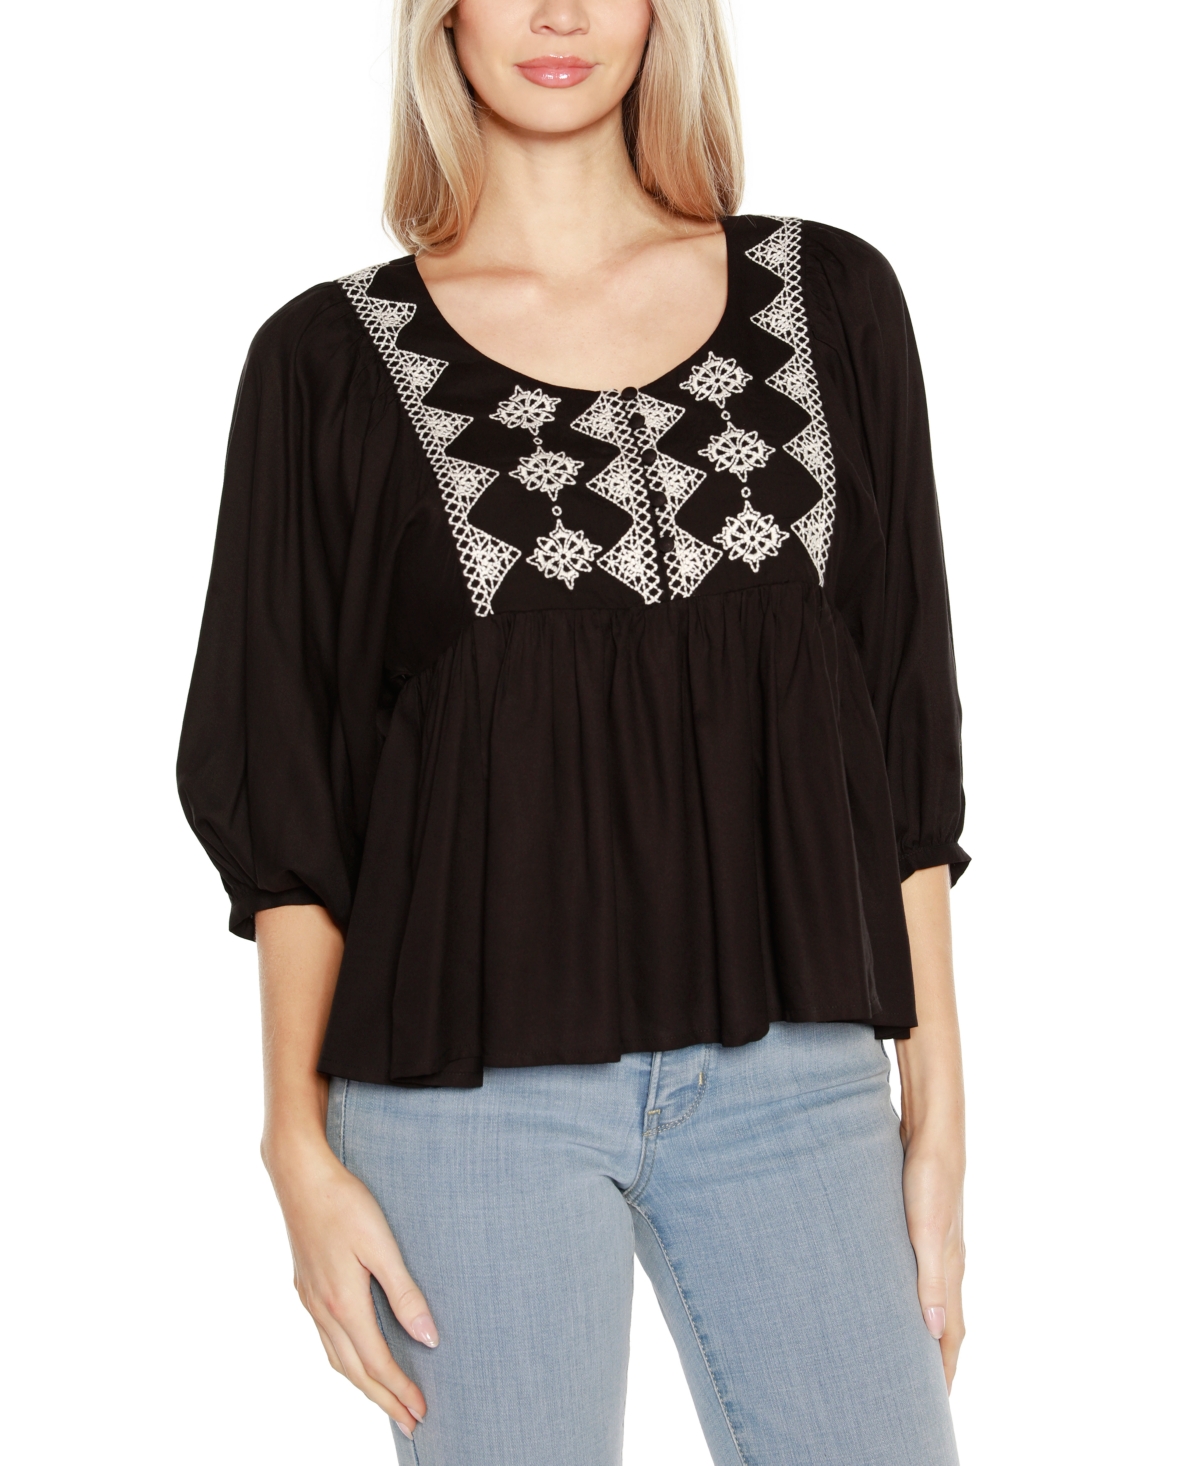 Black Label Embroidered Boho Fit-and-Flare Top - Wht/blk